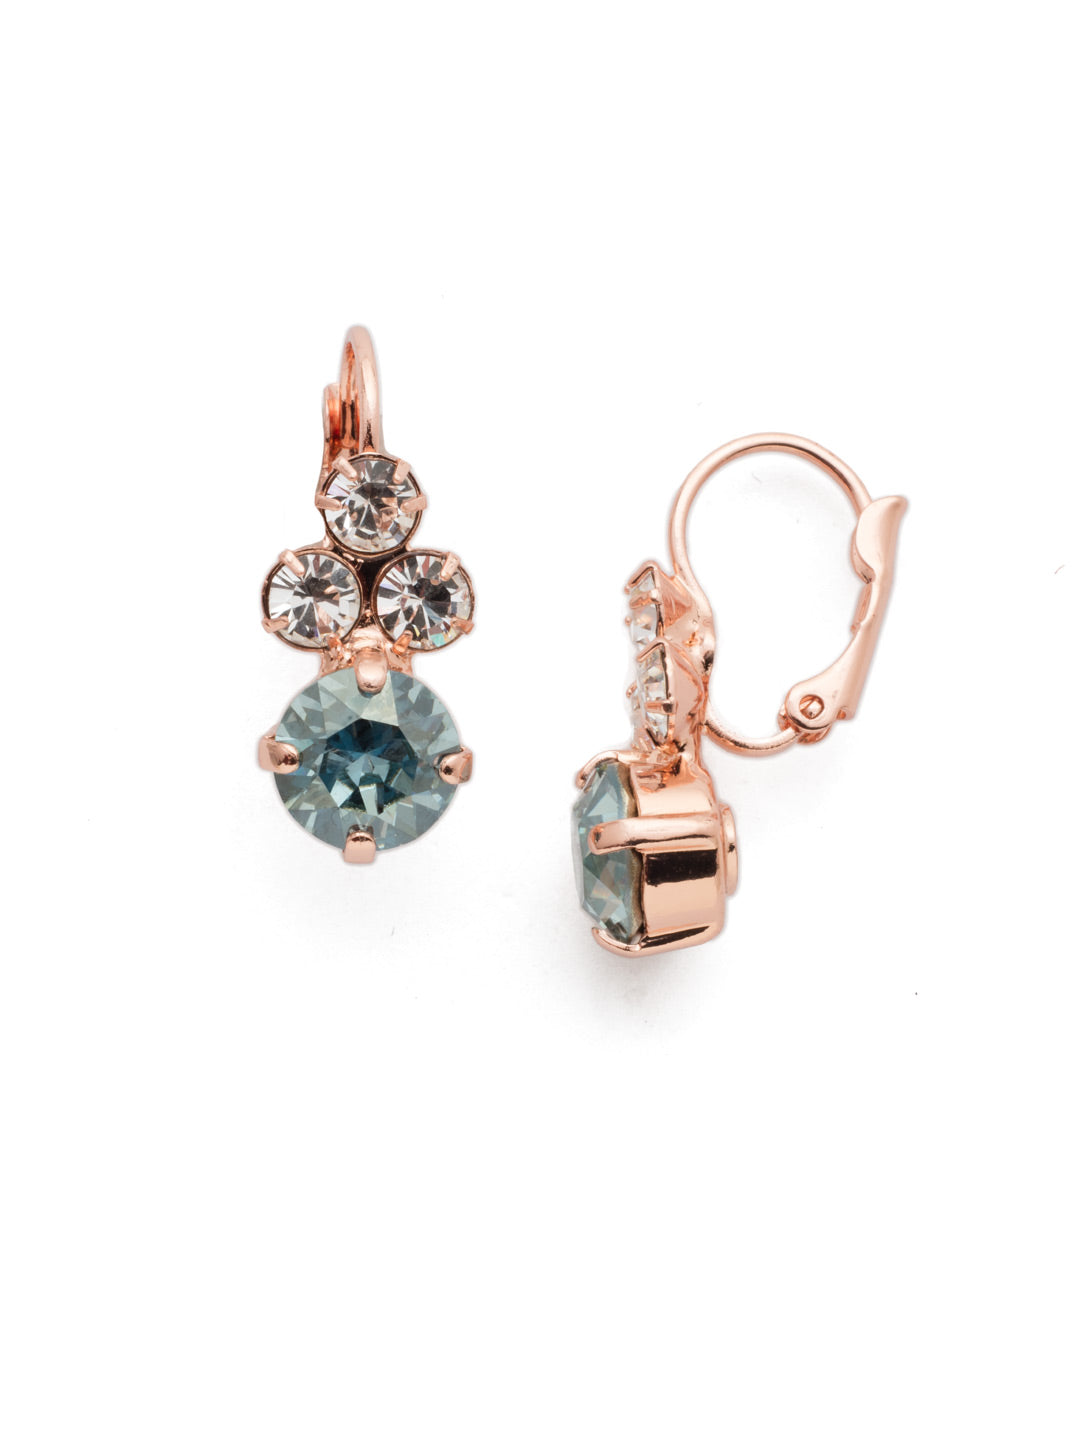 Wisteria Dangle Earrings - EDQ36RGCAZ - Round and round we go with a linear pattern of circular crystals. From Sorrelli's Crystal Azure collection in our Rose Gold-tone finish.